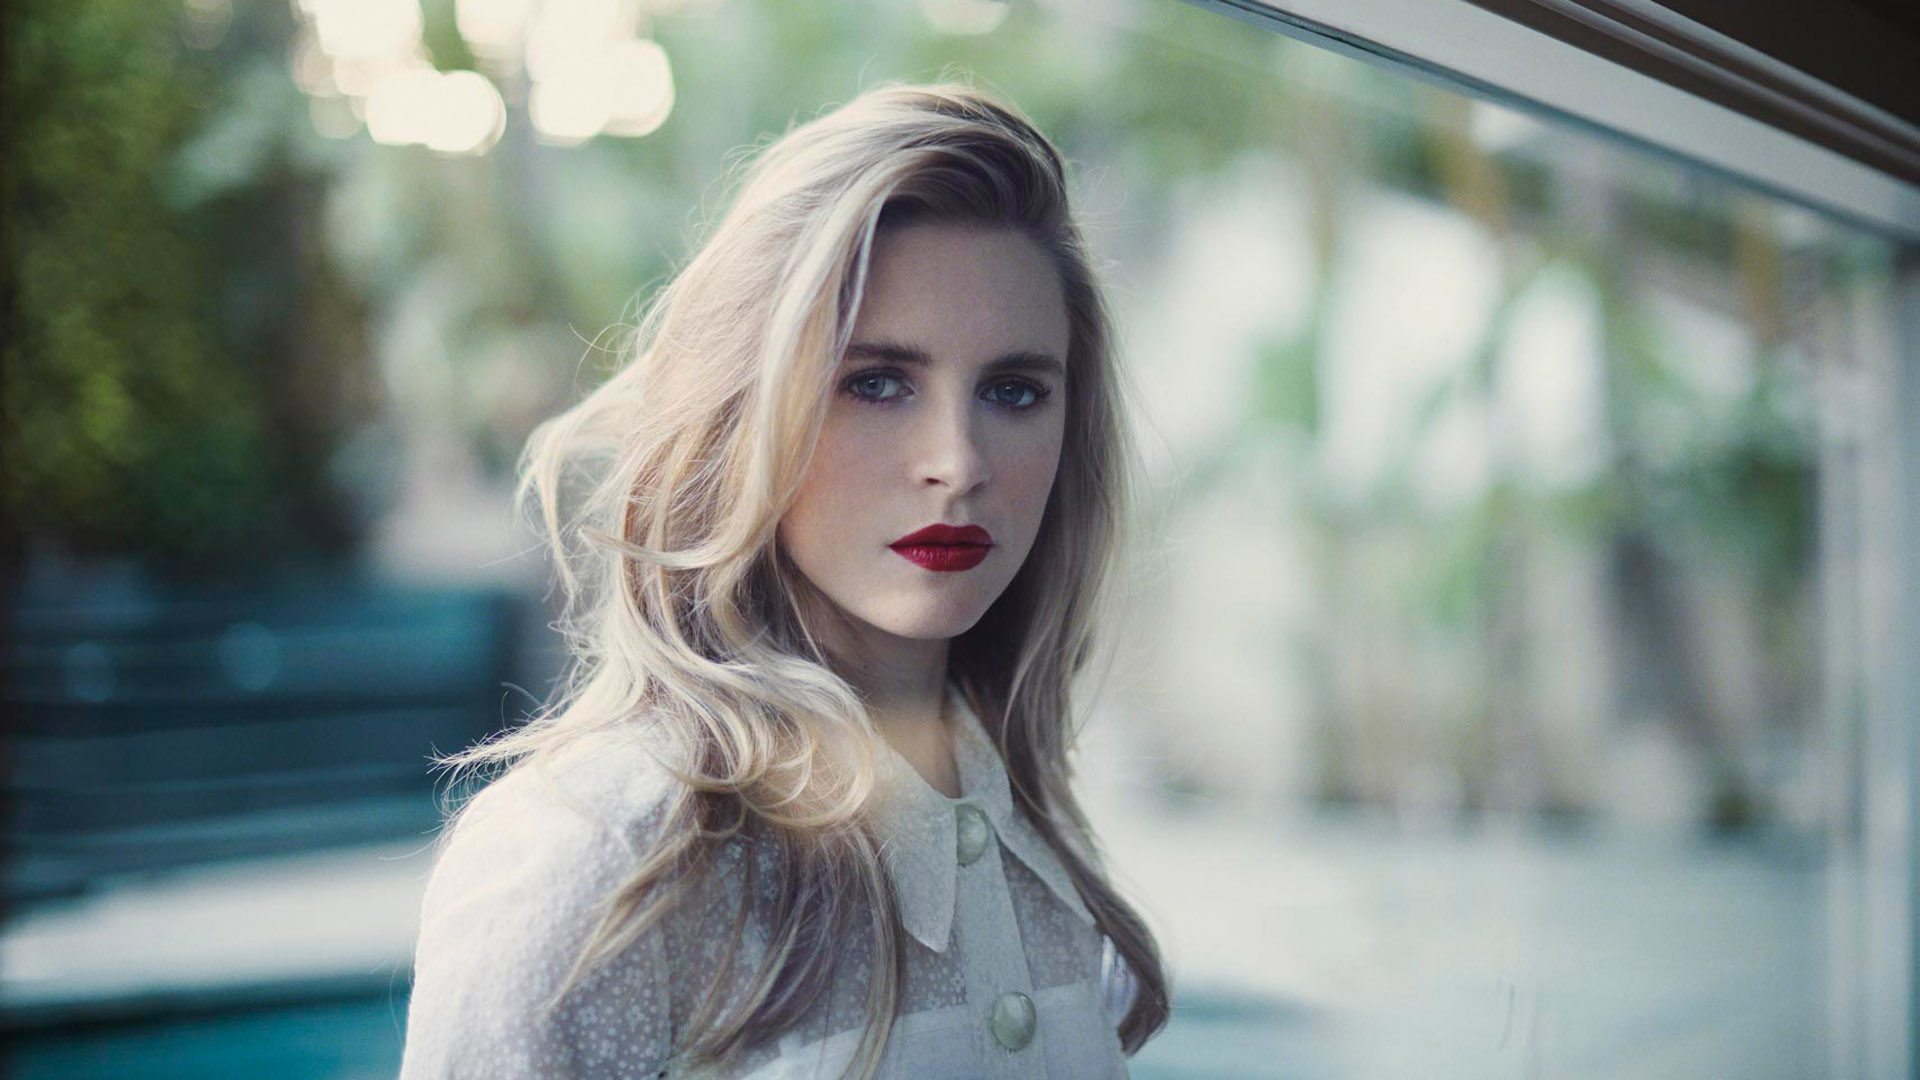 Brit Marling Hottest Photos | Sexy Near-Nude Pictures, GIFs